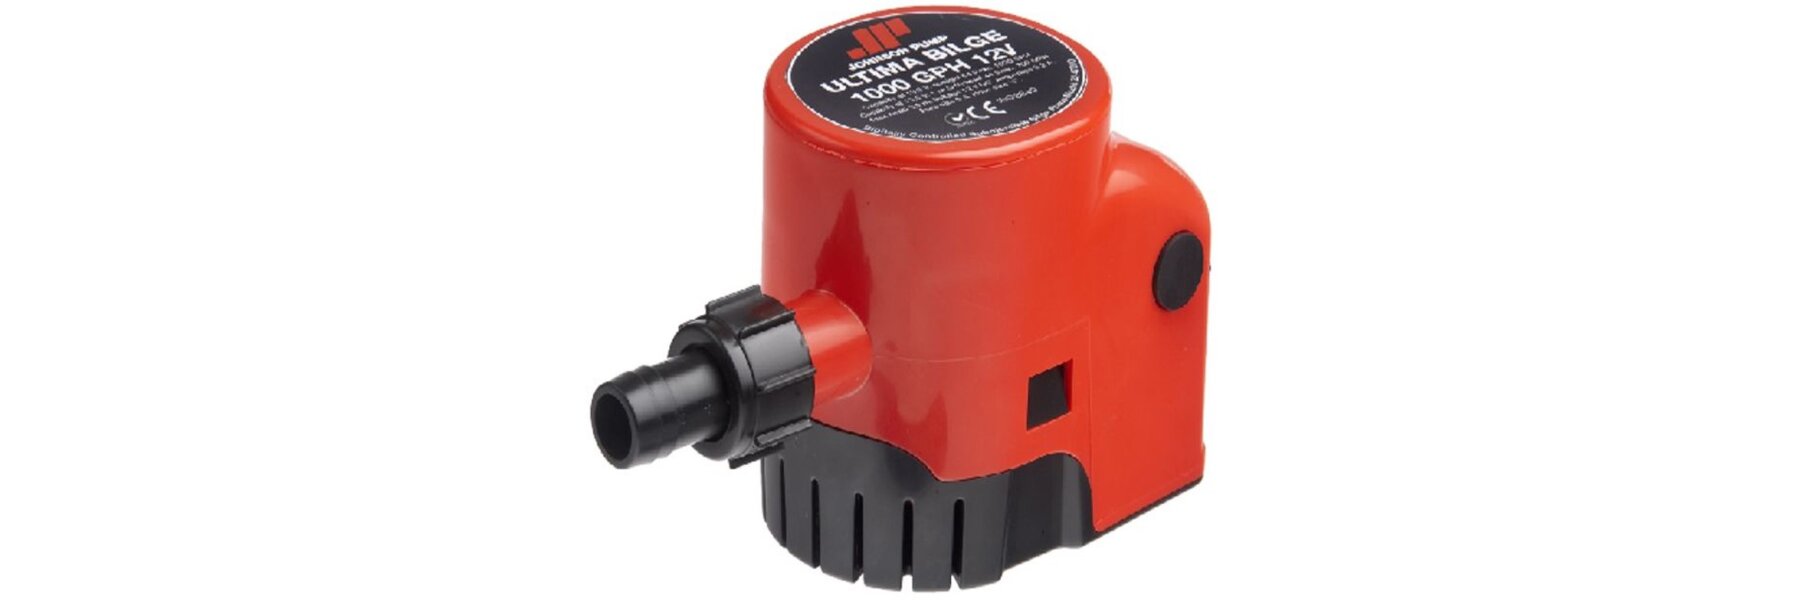 SPX Johnson Pump: Submersible Bilge Pumps and accessories - buy onlin